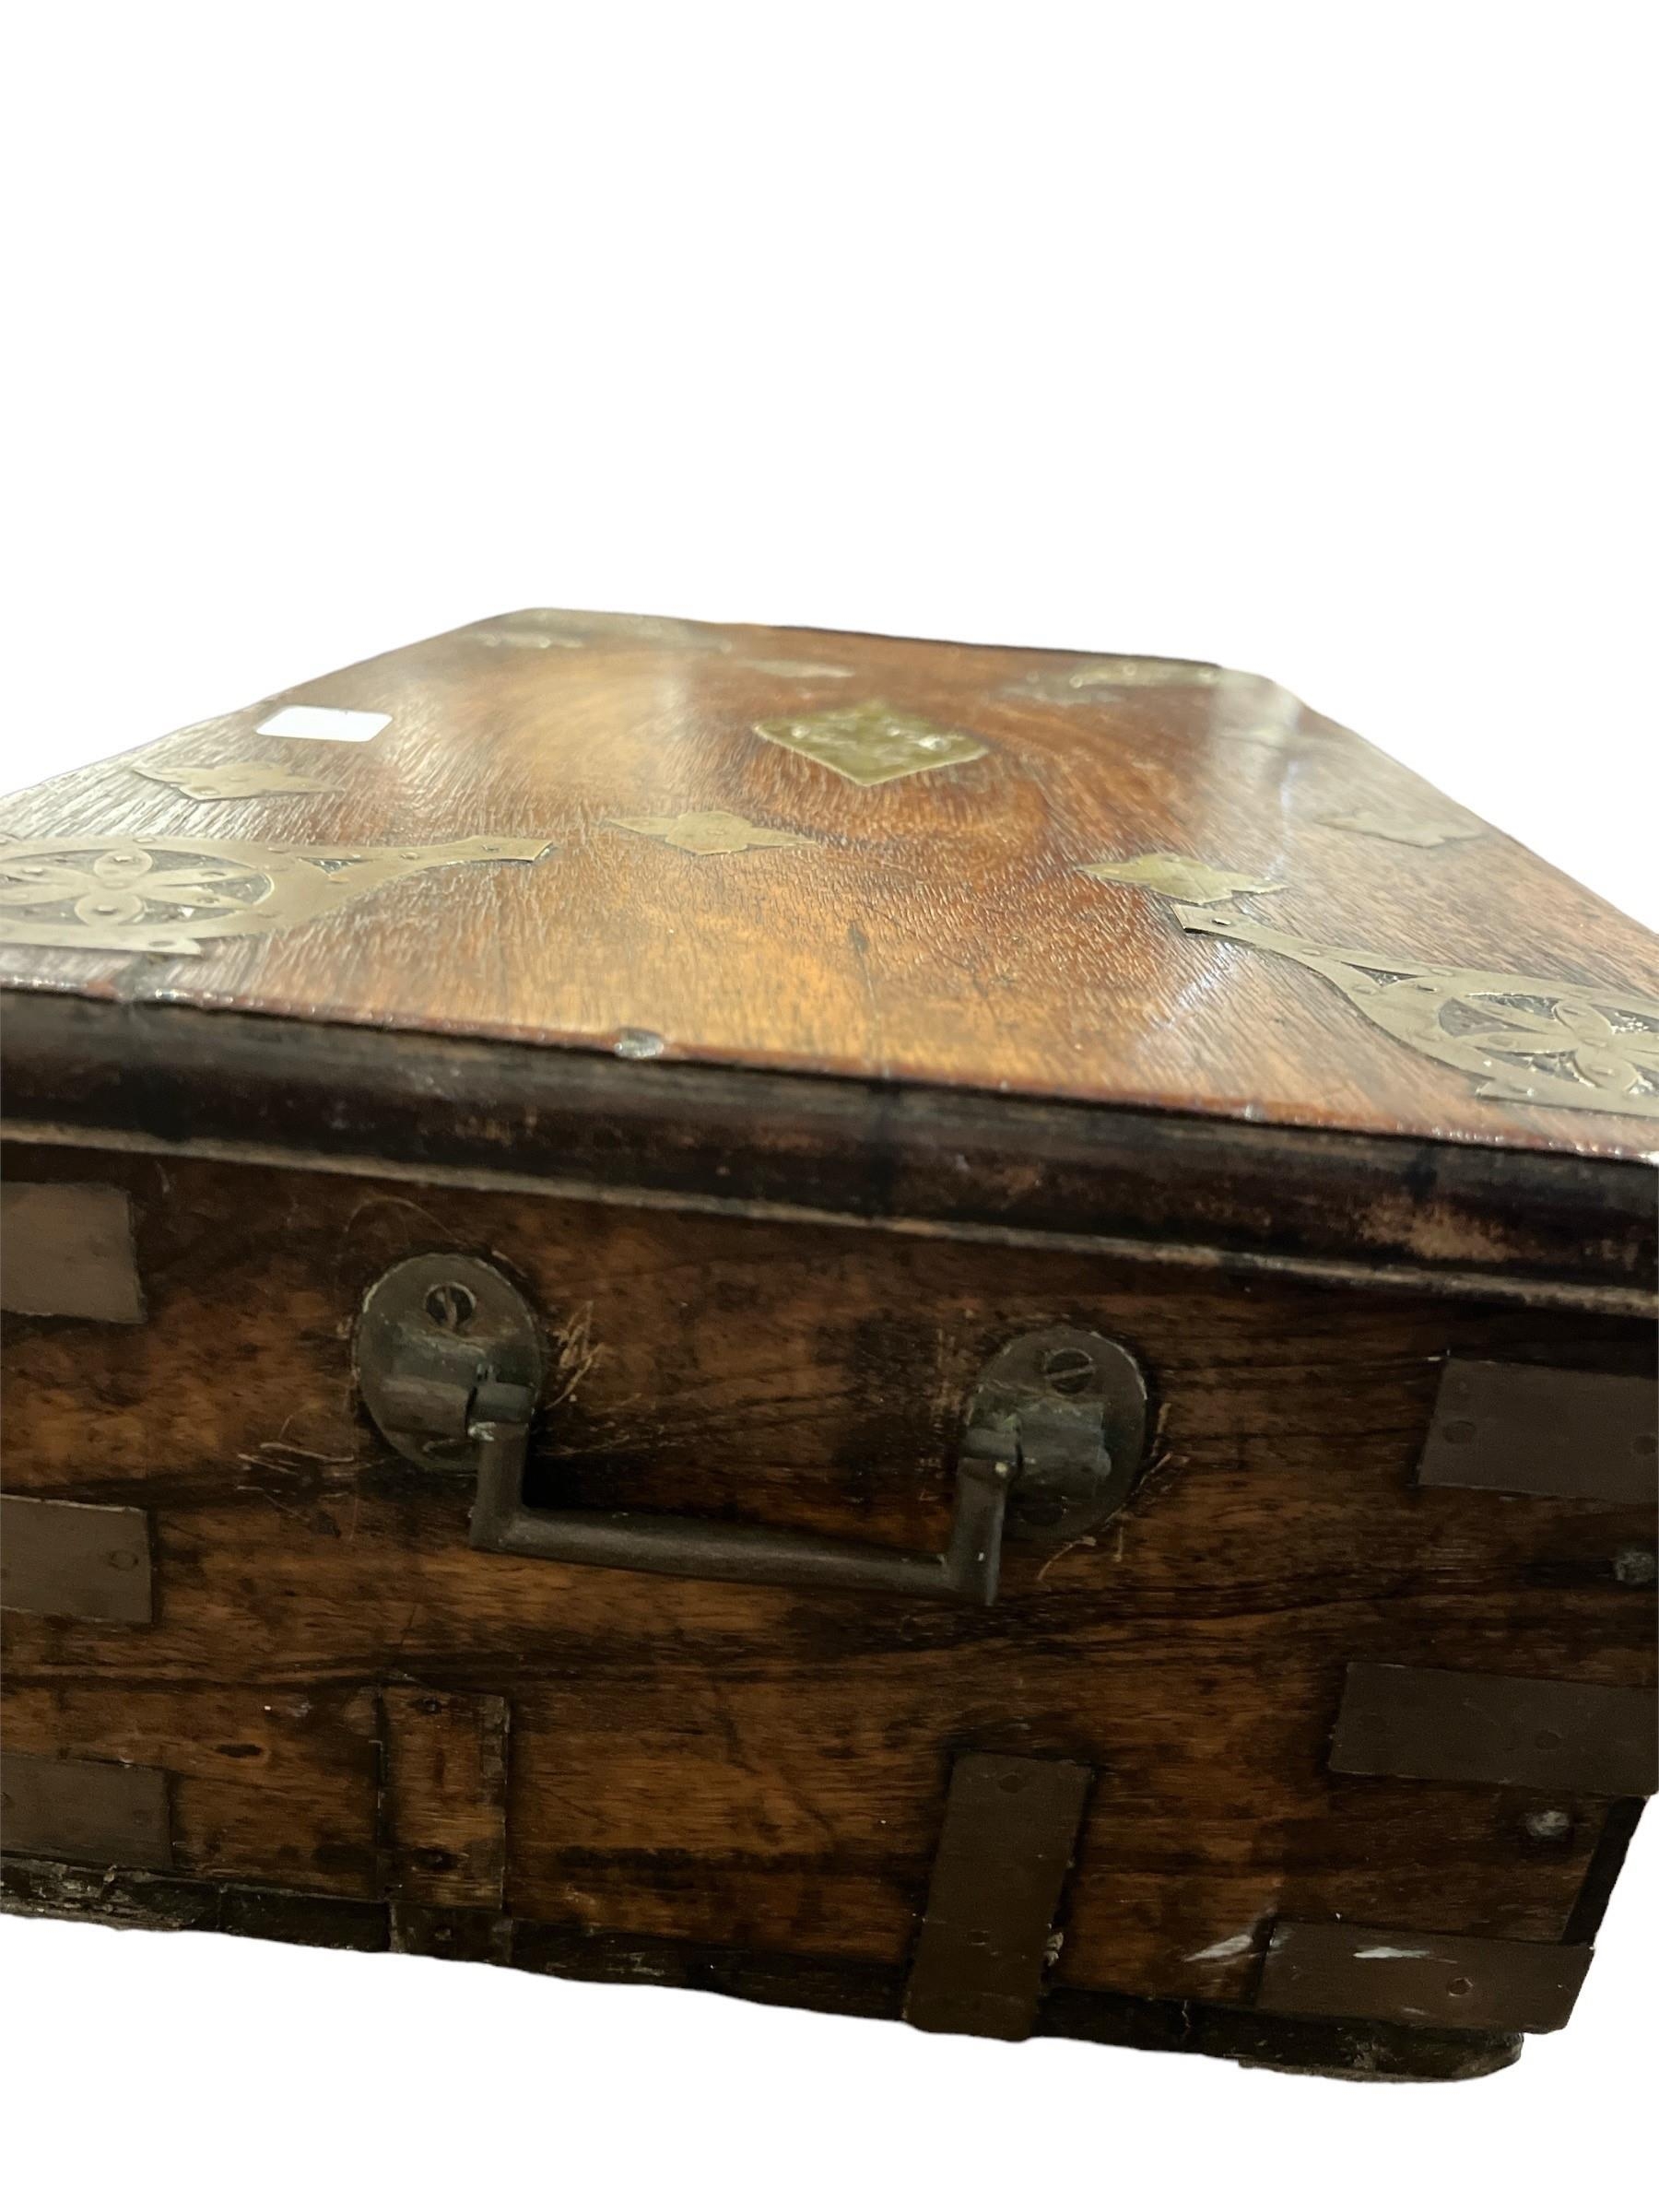 A 19TH CENTURY COLONIAL HARDWOOD AND BRASS BOUND DOCUMENT WRITING BOX With fitted interior. - Image 3 of 4